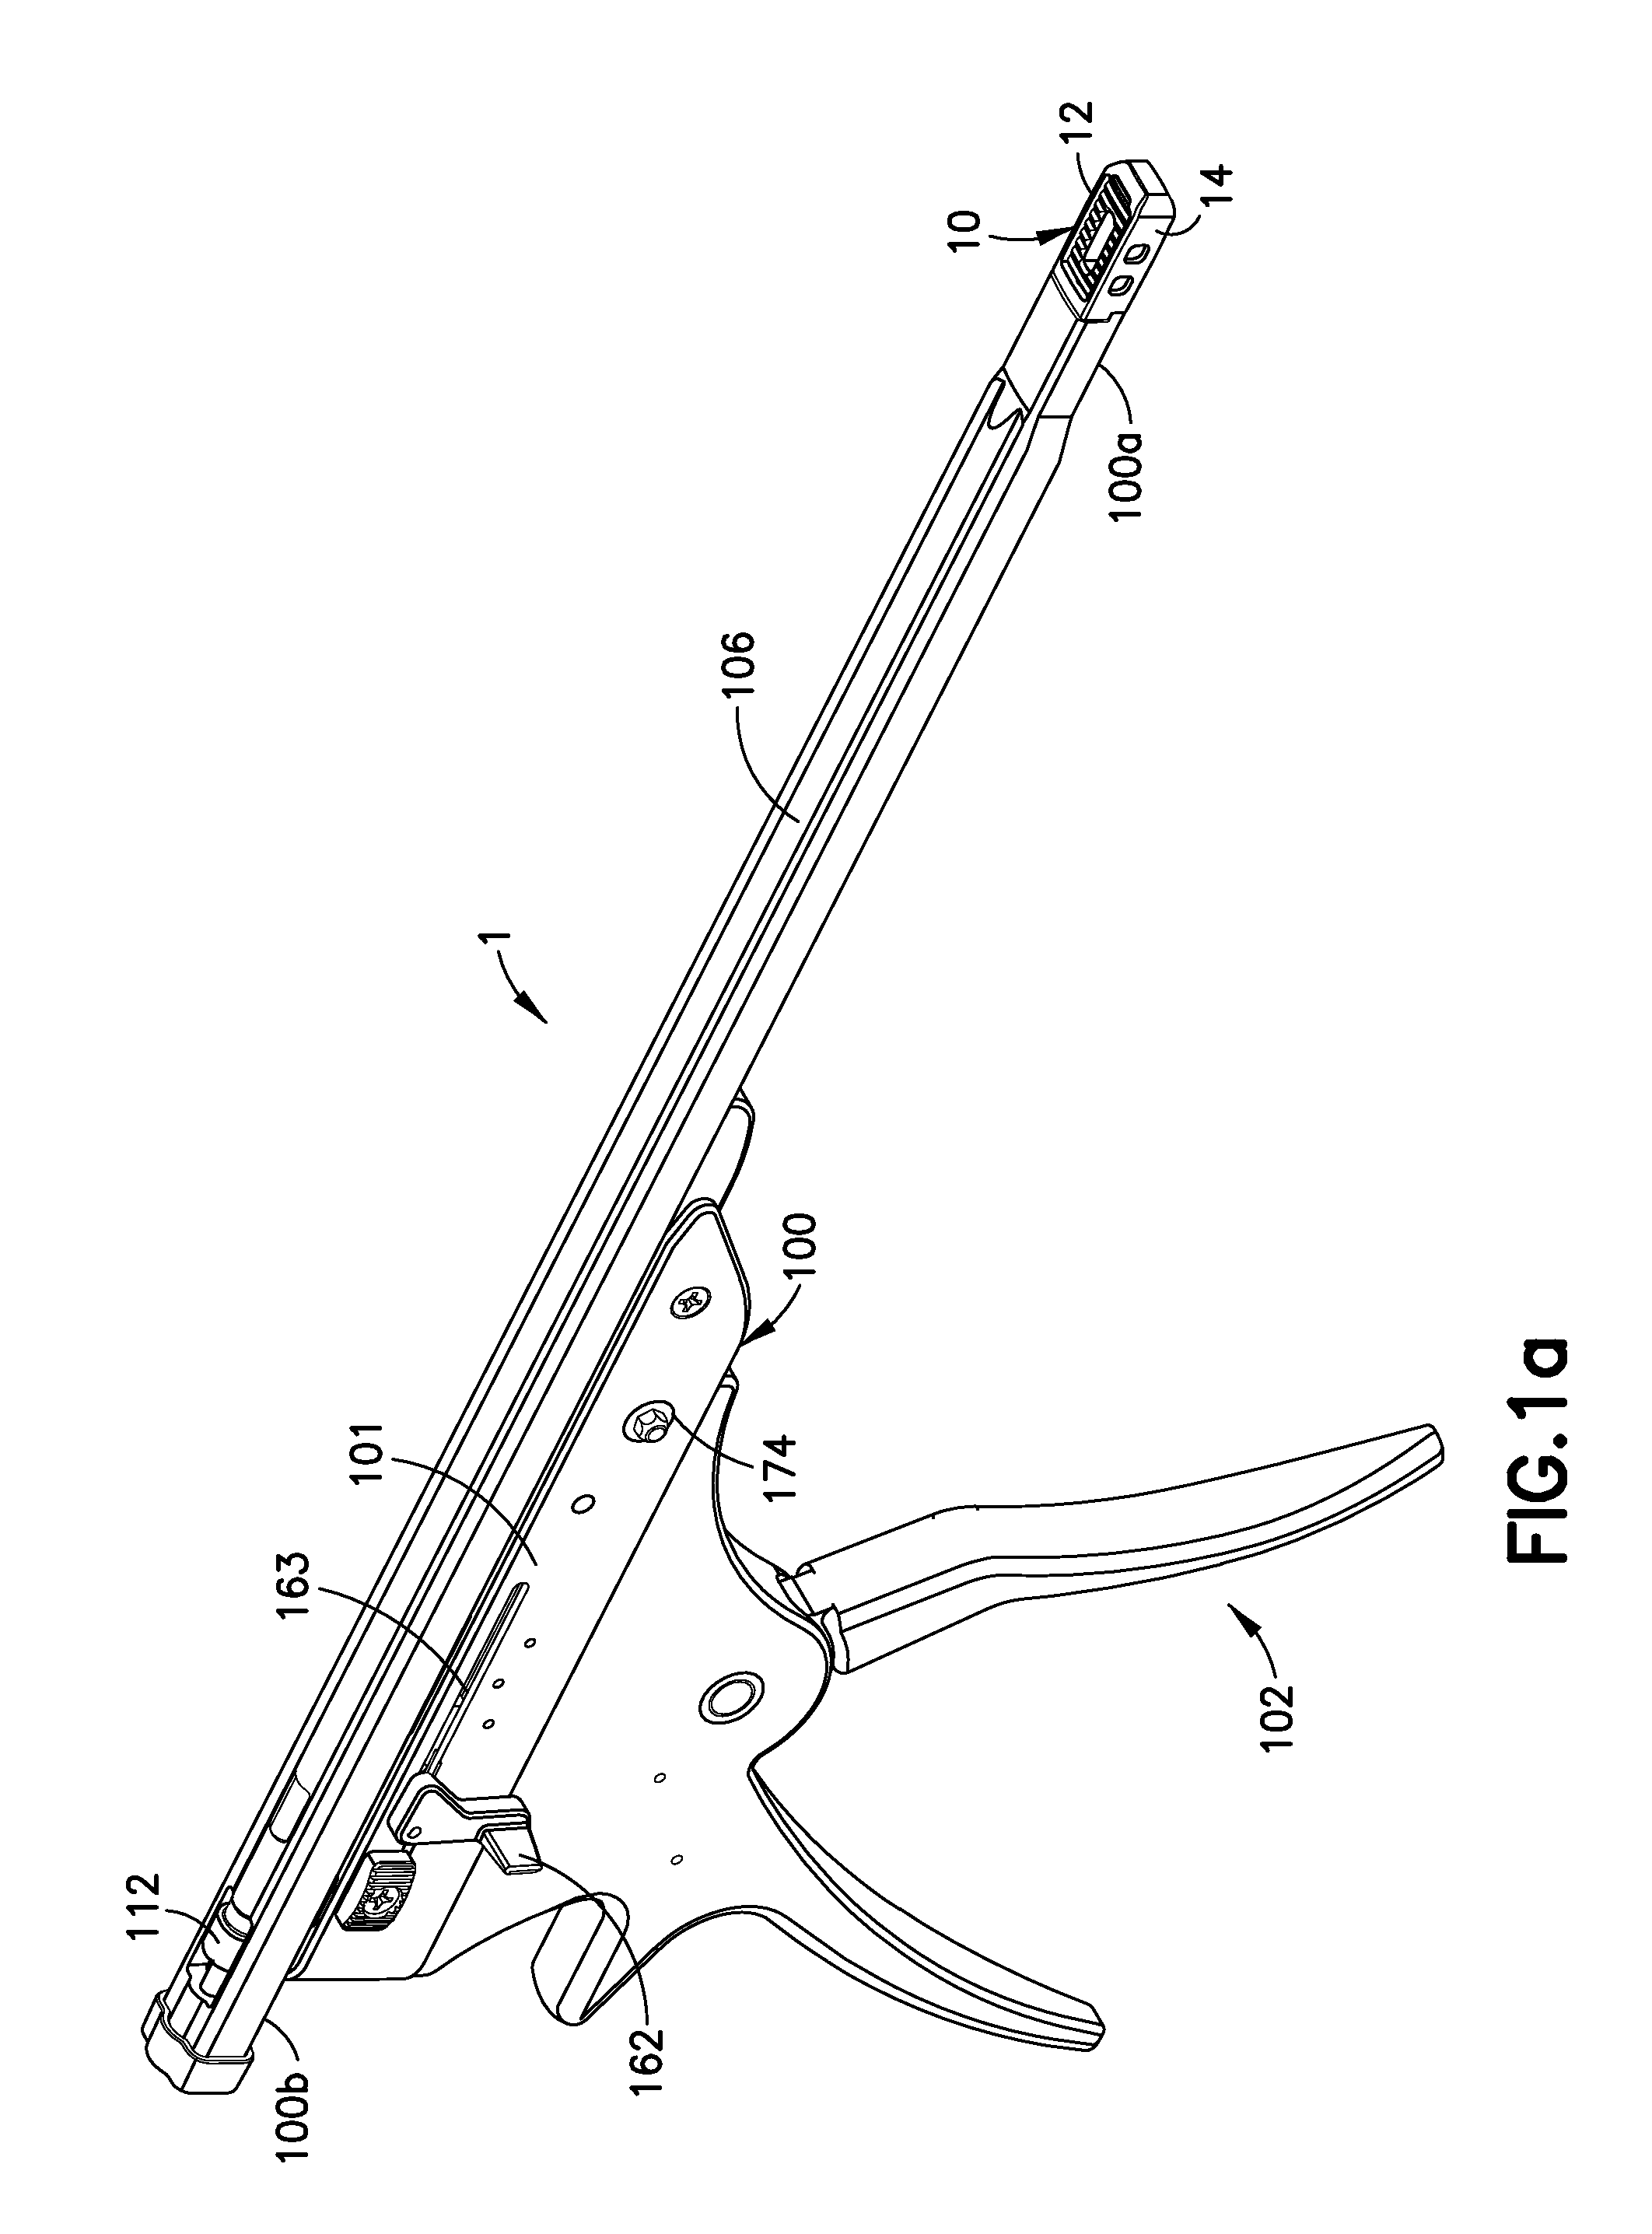 Method of expanding a spinal interbody fusion device